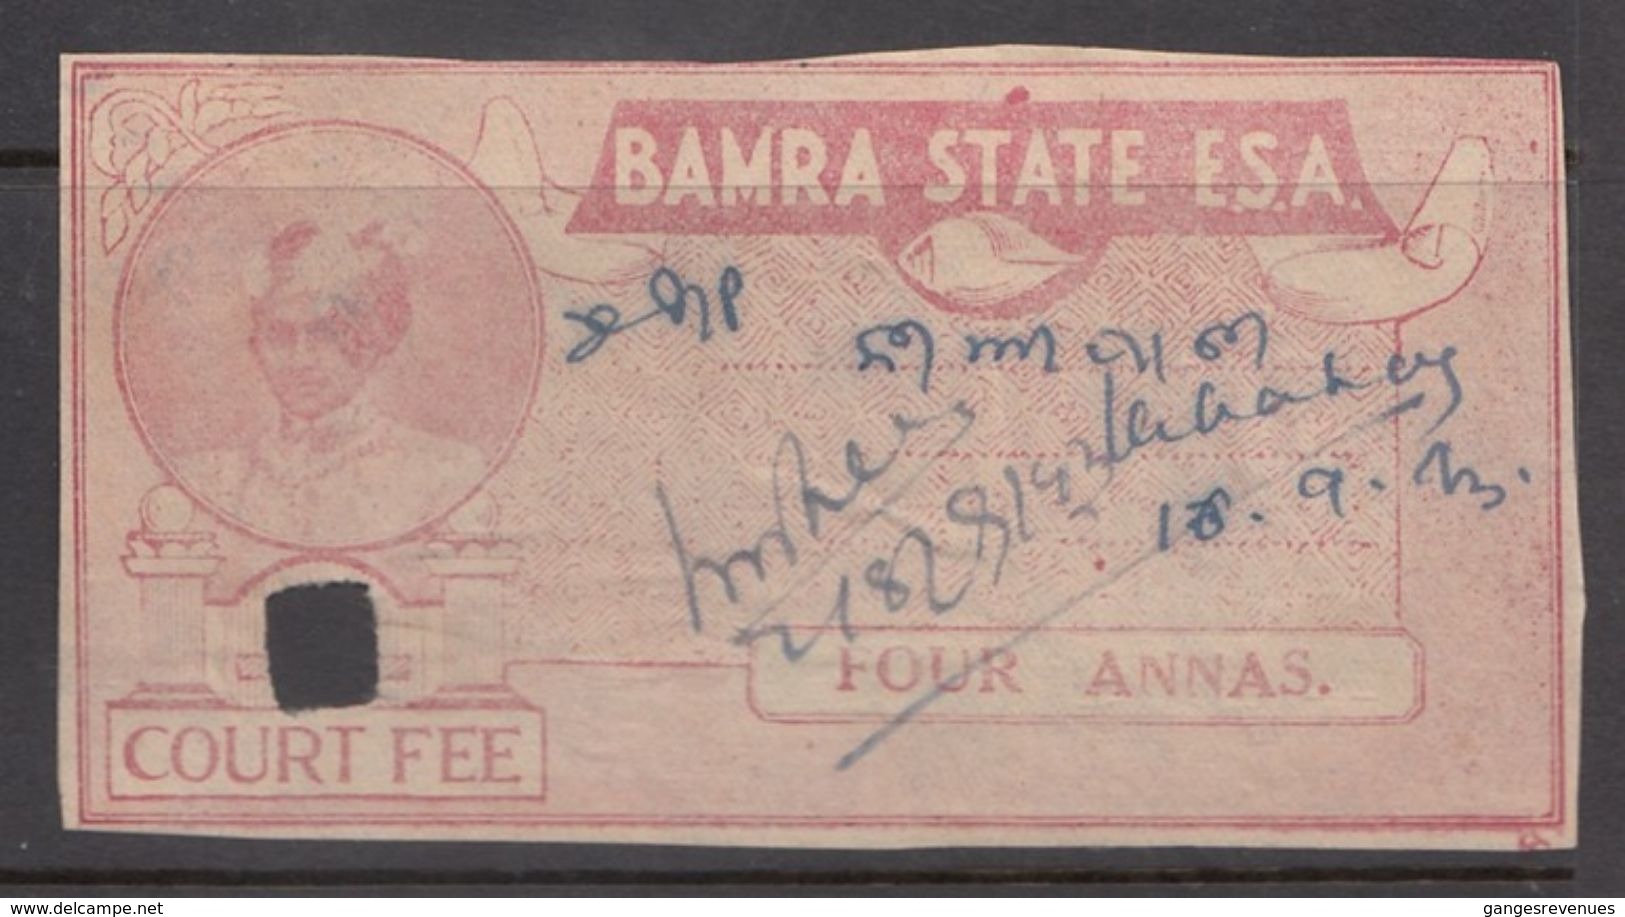 BAMRA State  4A  FULL STOP  Court Fee Type 11 E  #  98407  Inde Indien  India Fiscaux Fiscal Revenue - Bamra